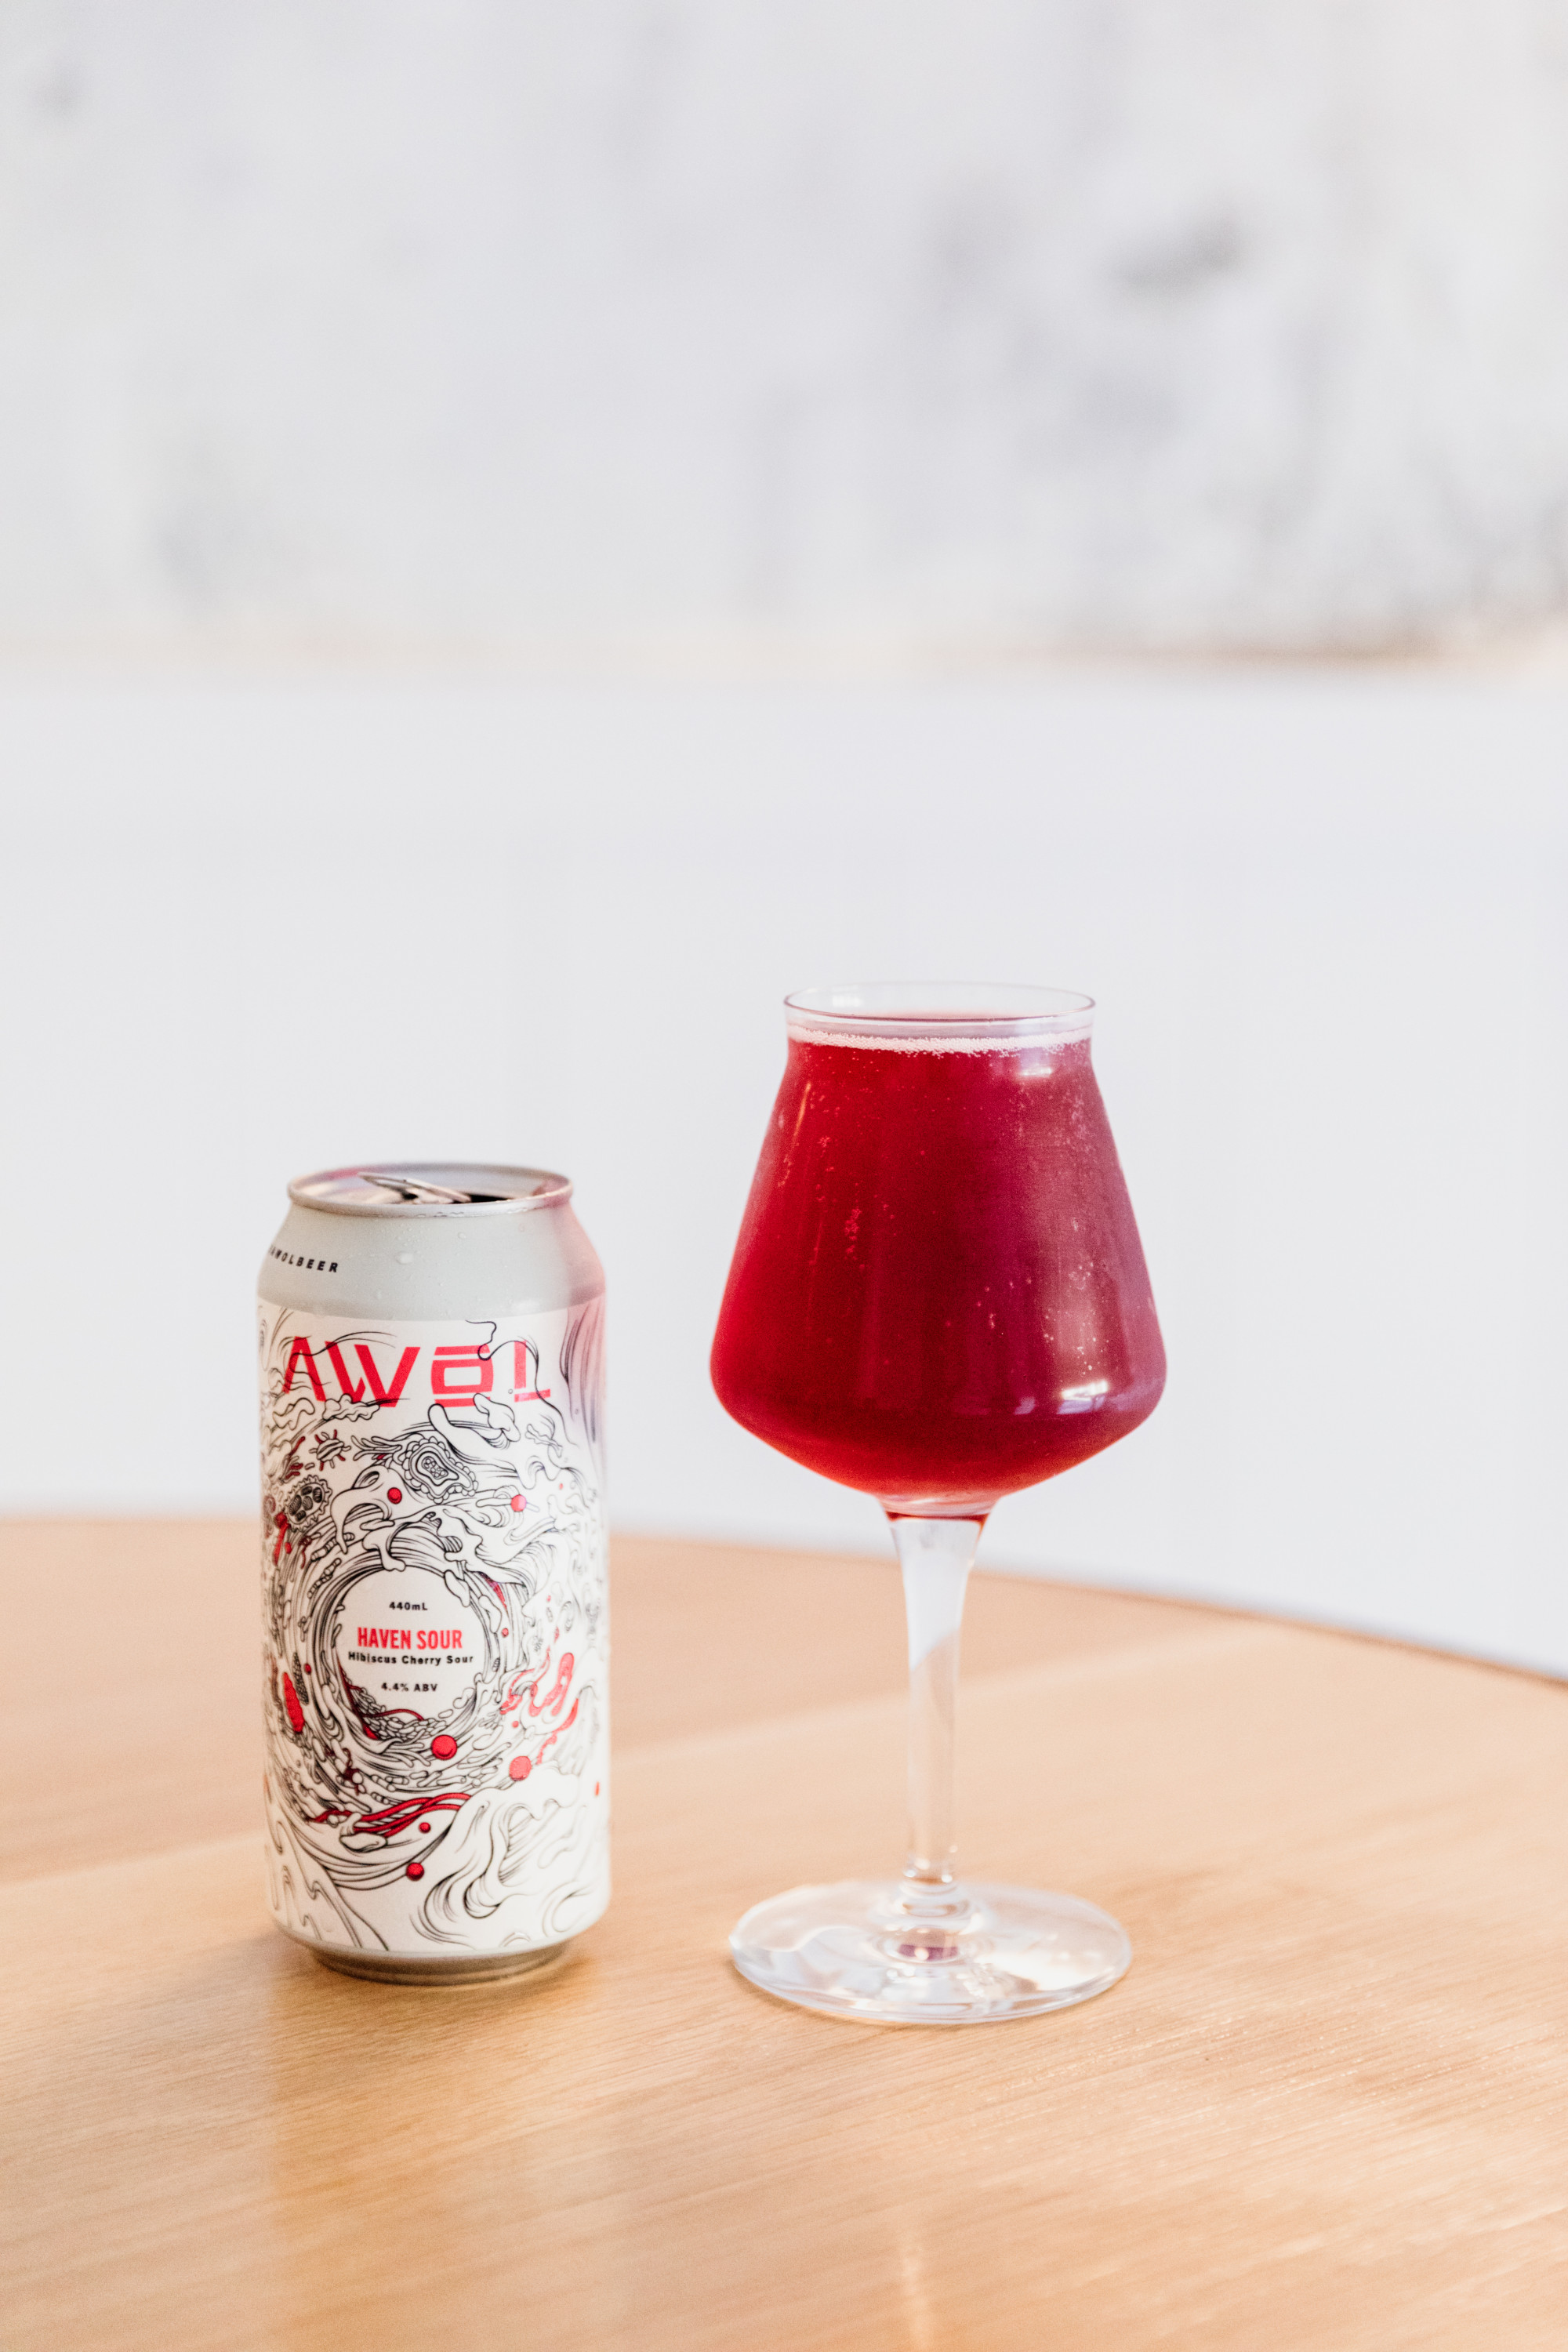 a red sour beer in a glass next to a can